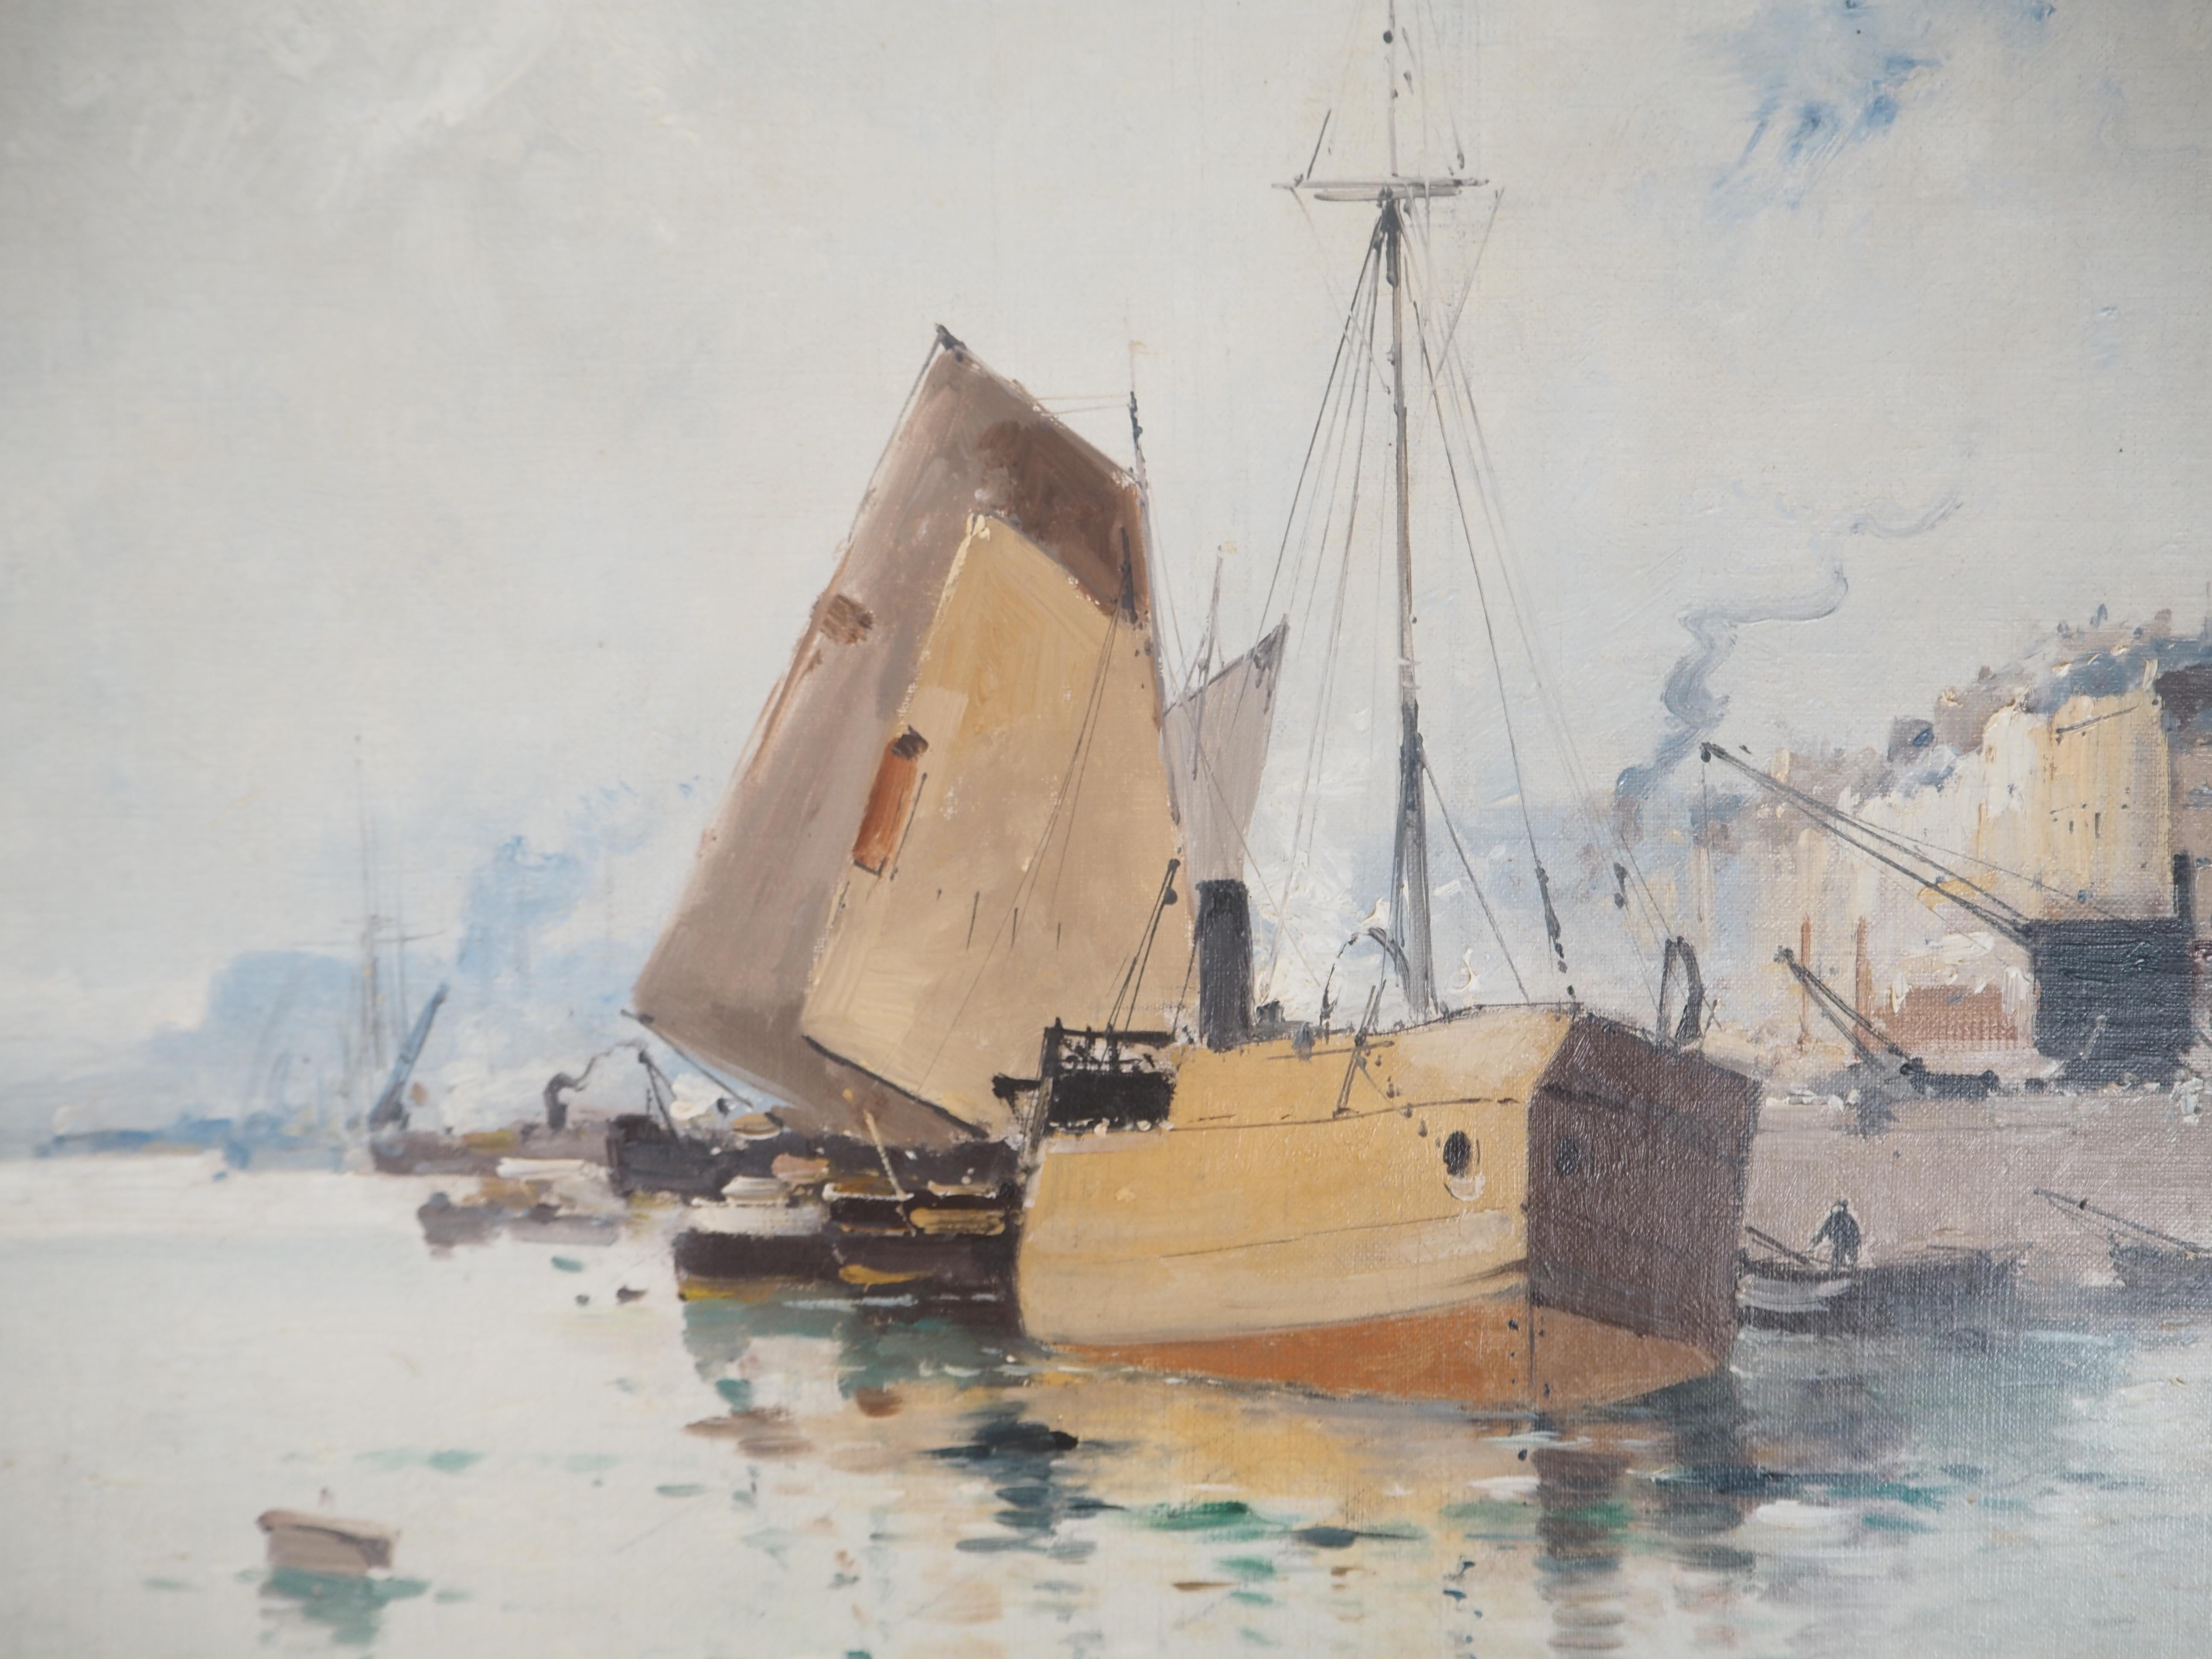 Eugene GALIEN - LALOUE
Boats Leaving the Harbor

Original oil painting on canvas 
Signed bottom right Paul Auber (pseudonym of the artist)
On canvas 50 x 61 cm (c. 20 x 24 in)
Presented in golden wood frame 75 x 85 cm (c. 30 x 34 in)

Very Good